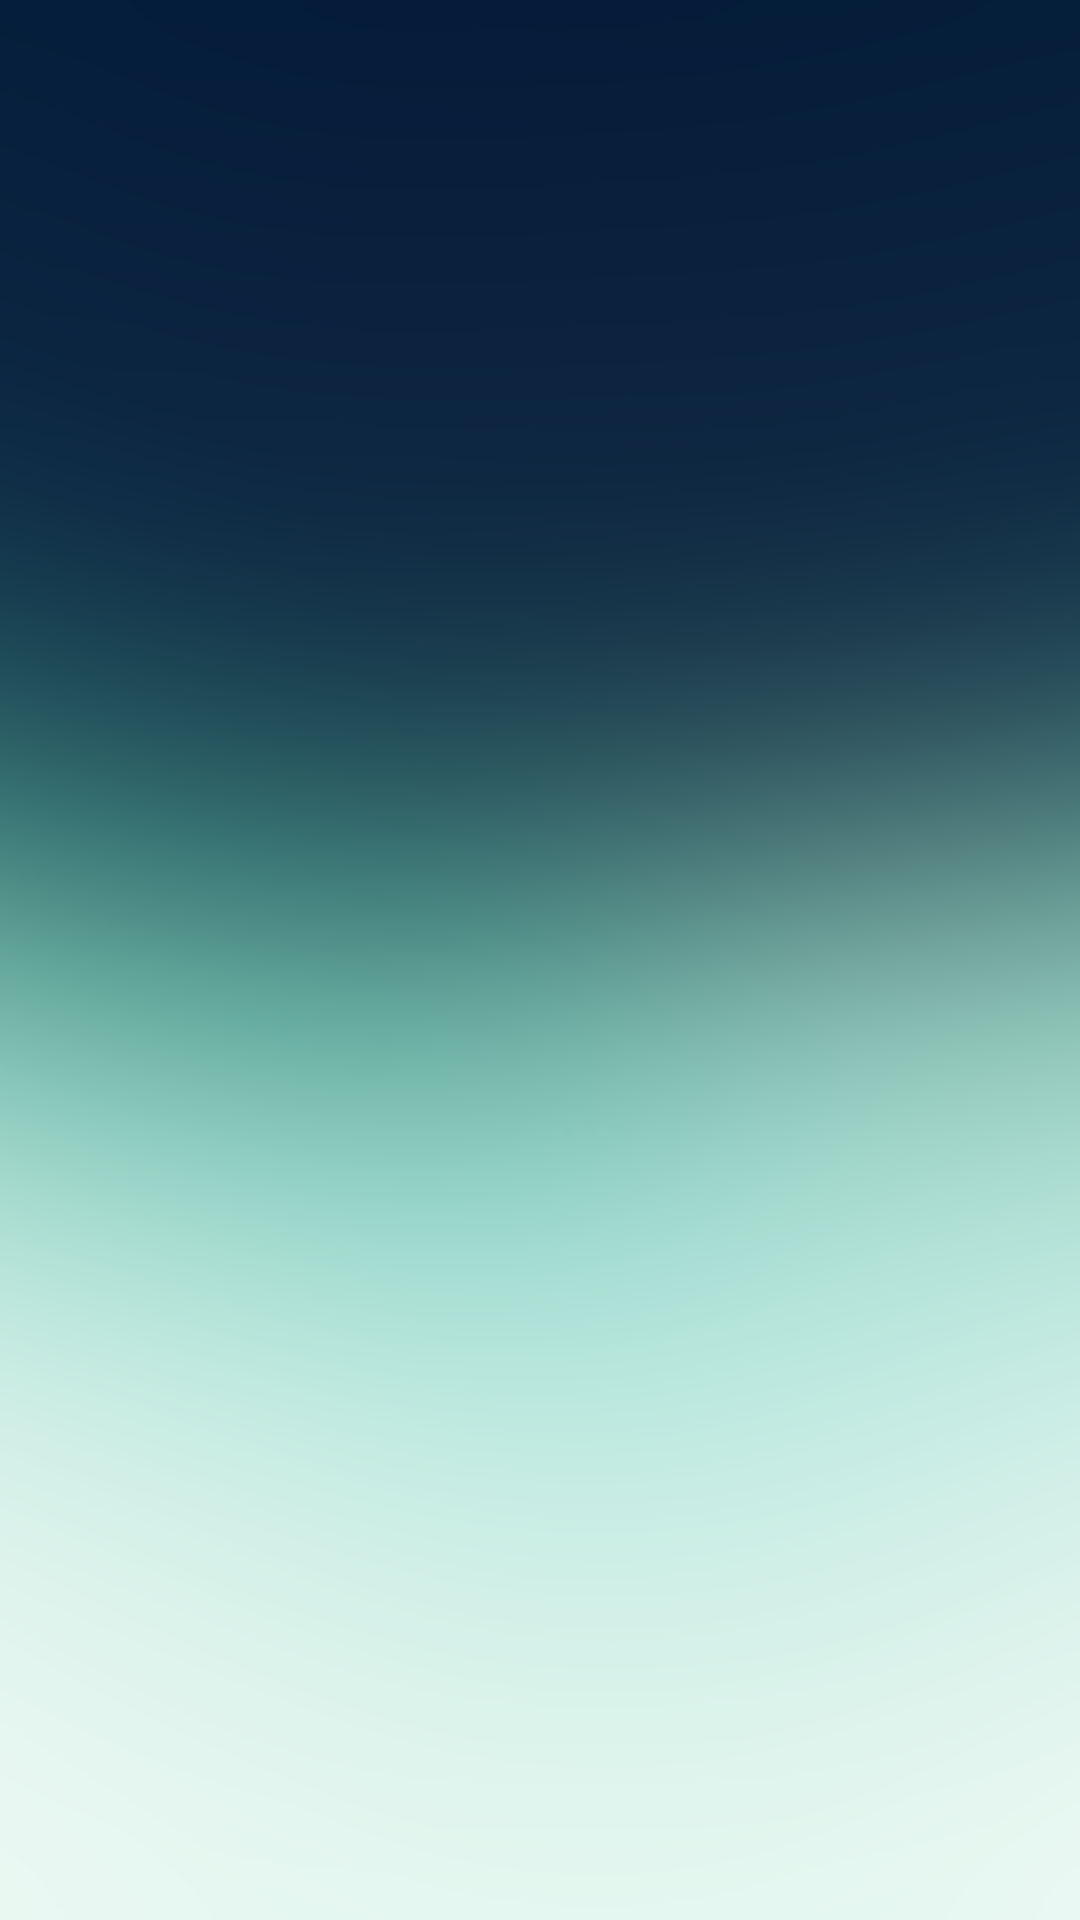 1080x1920 Green Blue Gradient Android Wallpaper ...